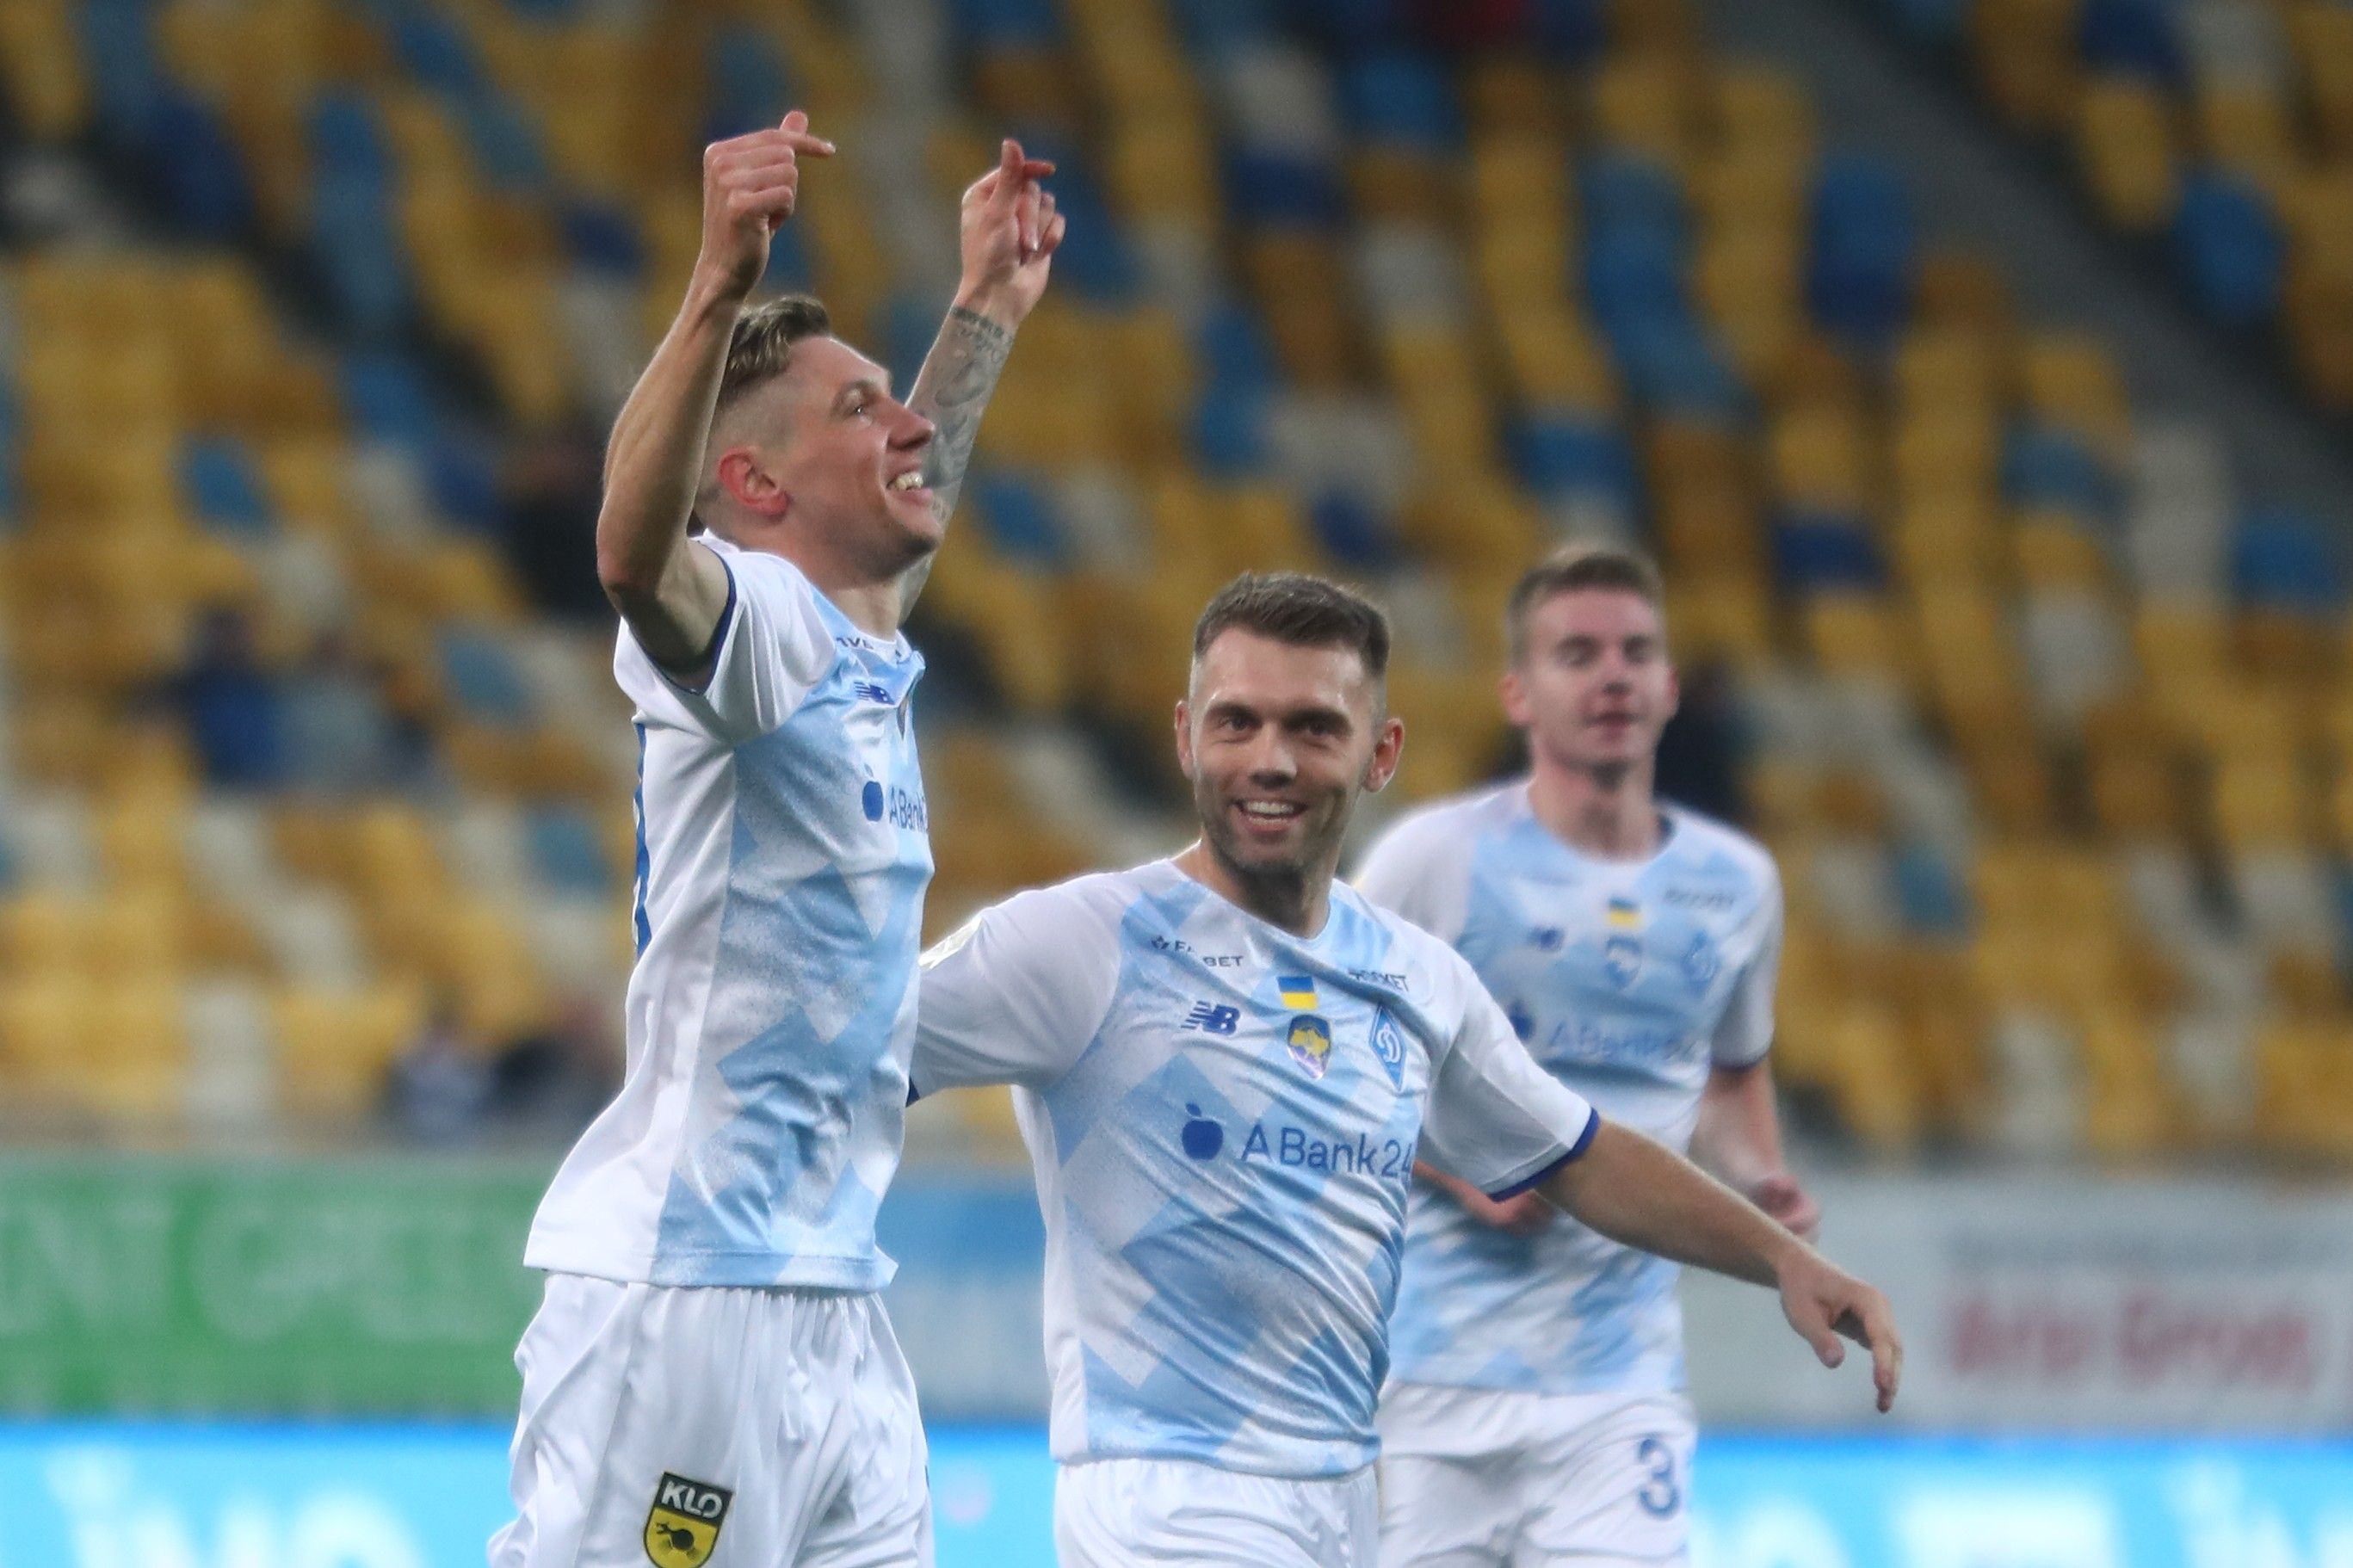 Denys Harmash – UPL player of the month for the second time in a row